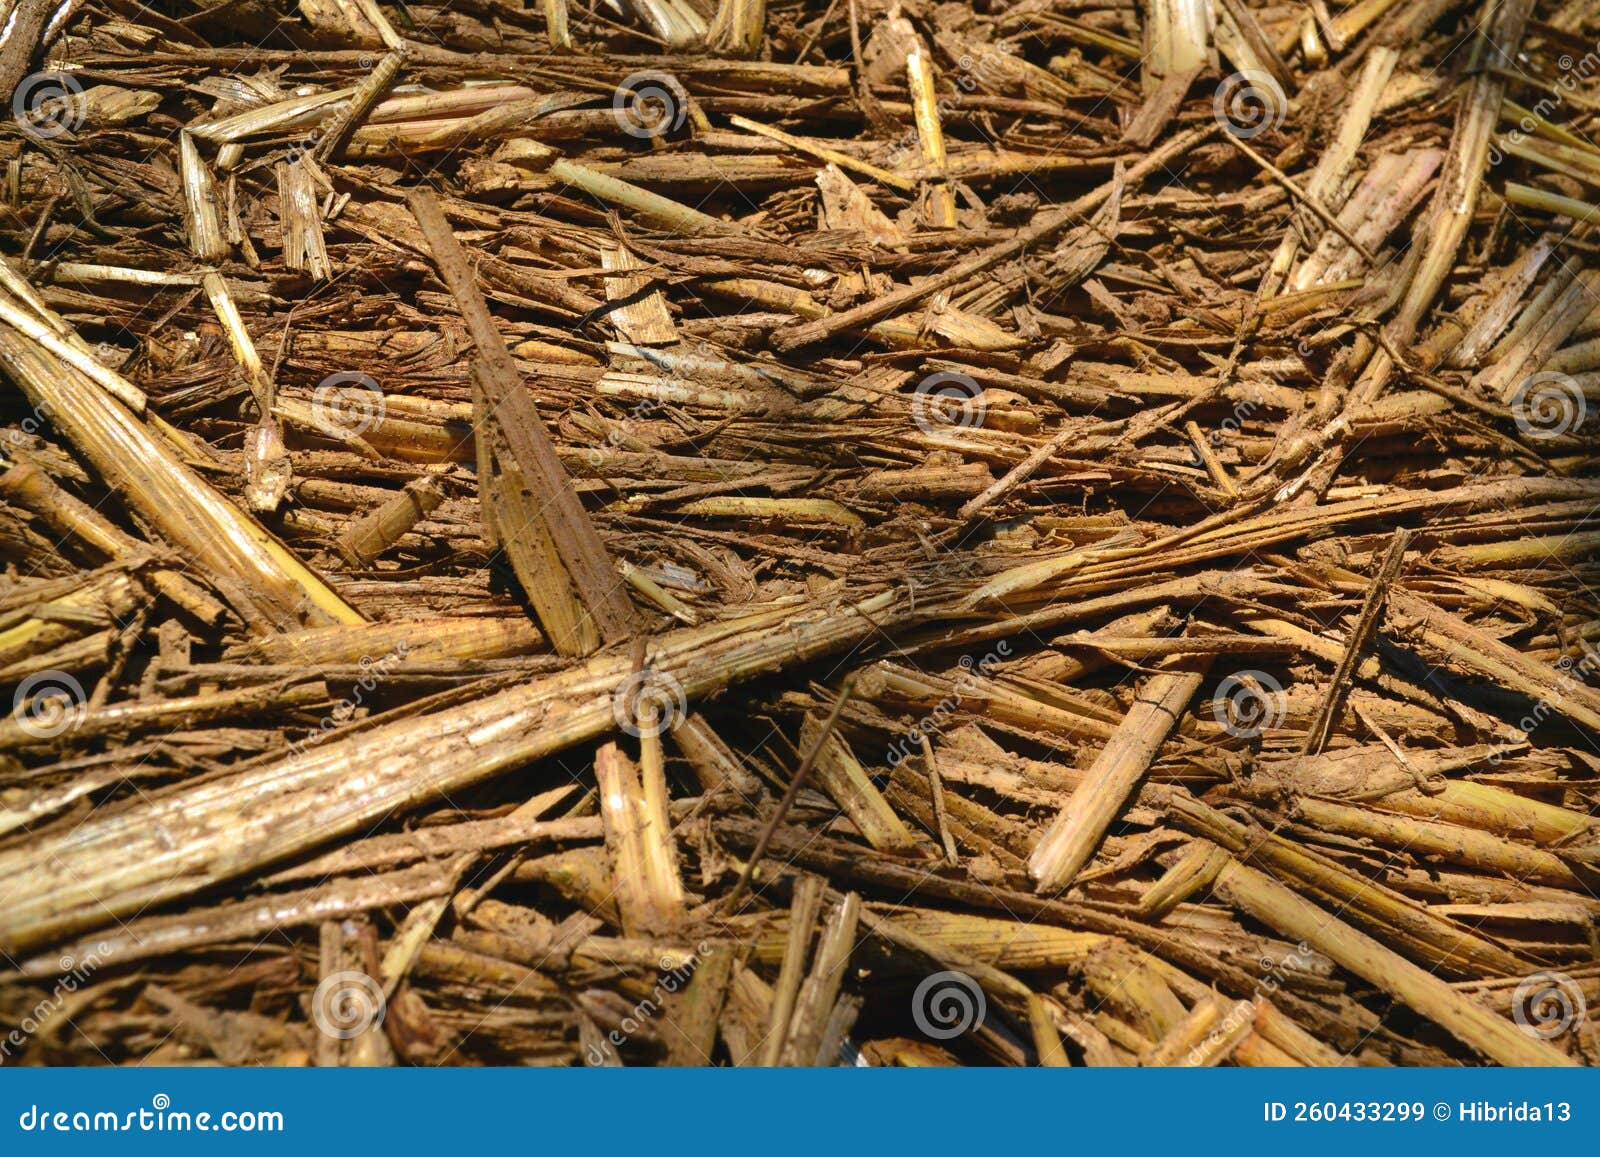 Background with Straw Sprinkled with Clay, Light Straw Clay Stock Image ...